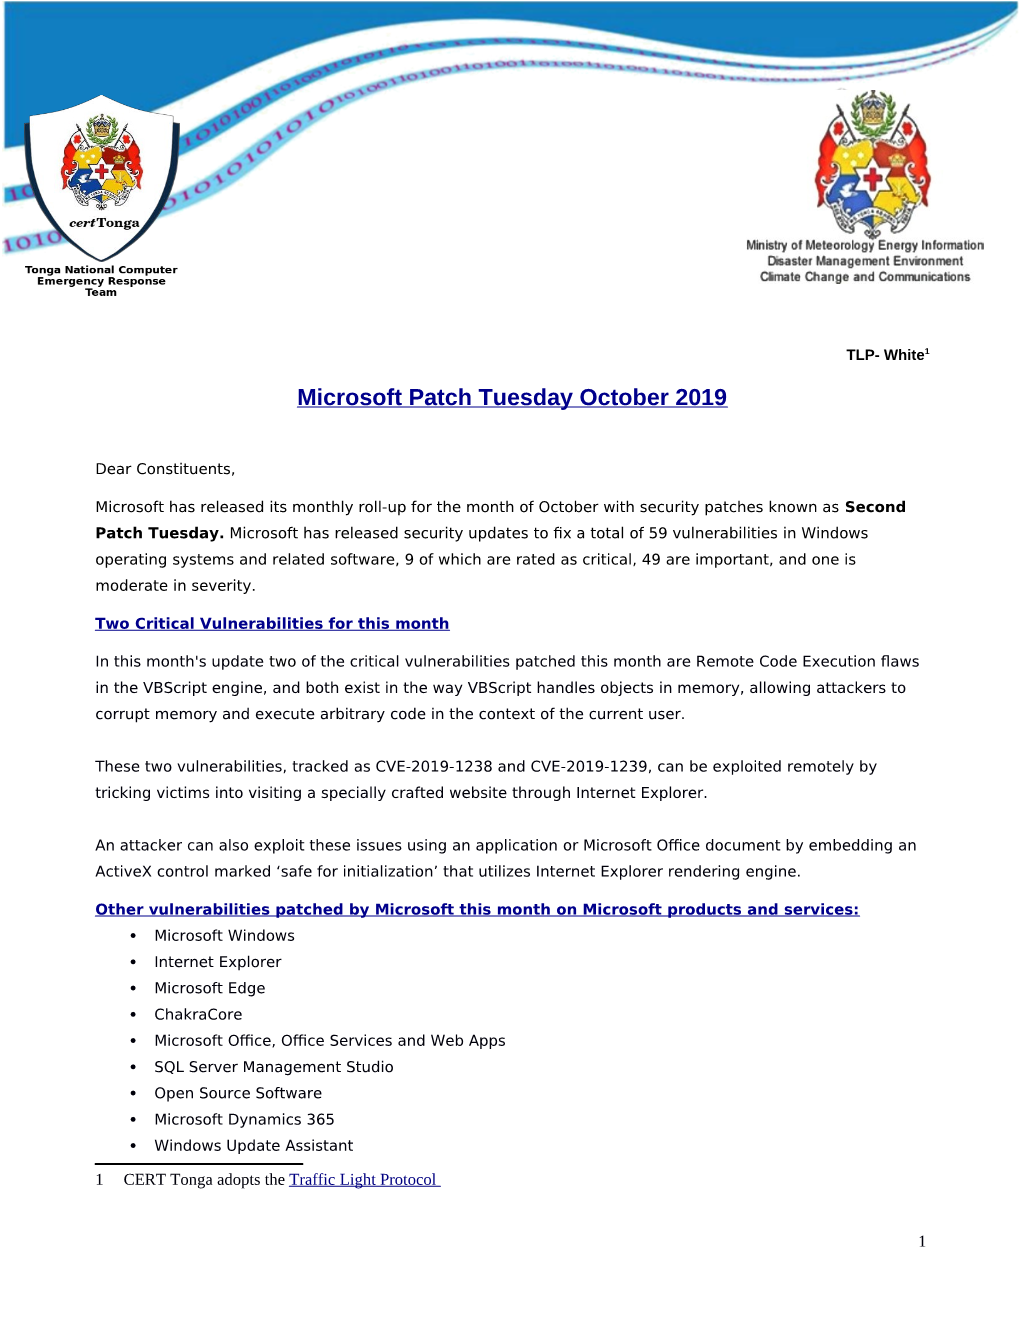 Microsoft Patch Tuesday October 2019